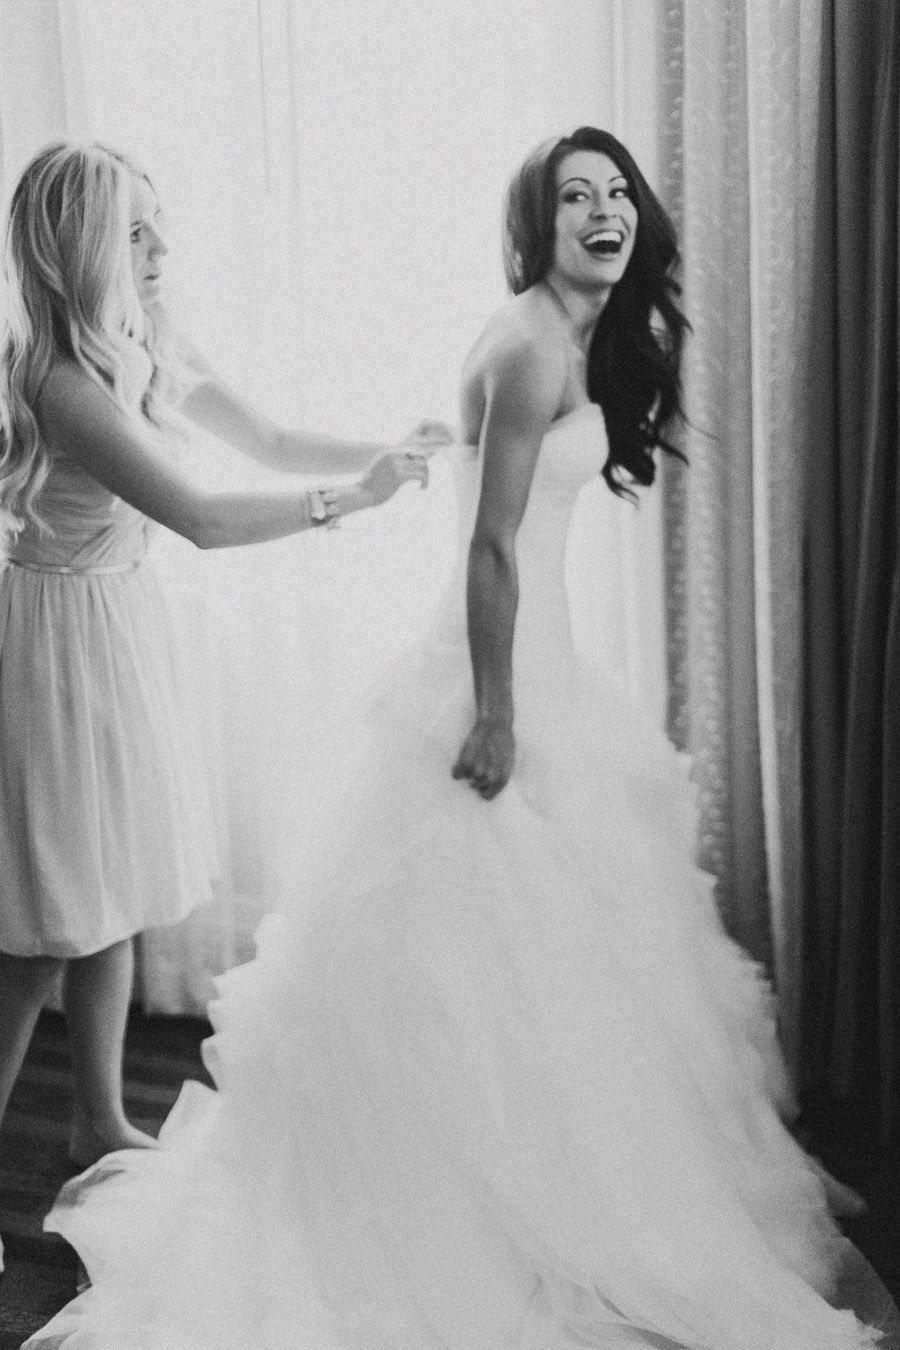 My best friend and I someday. Cant wait to share such a special moment with my BFF